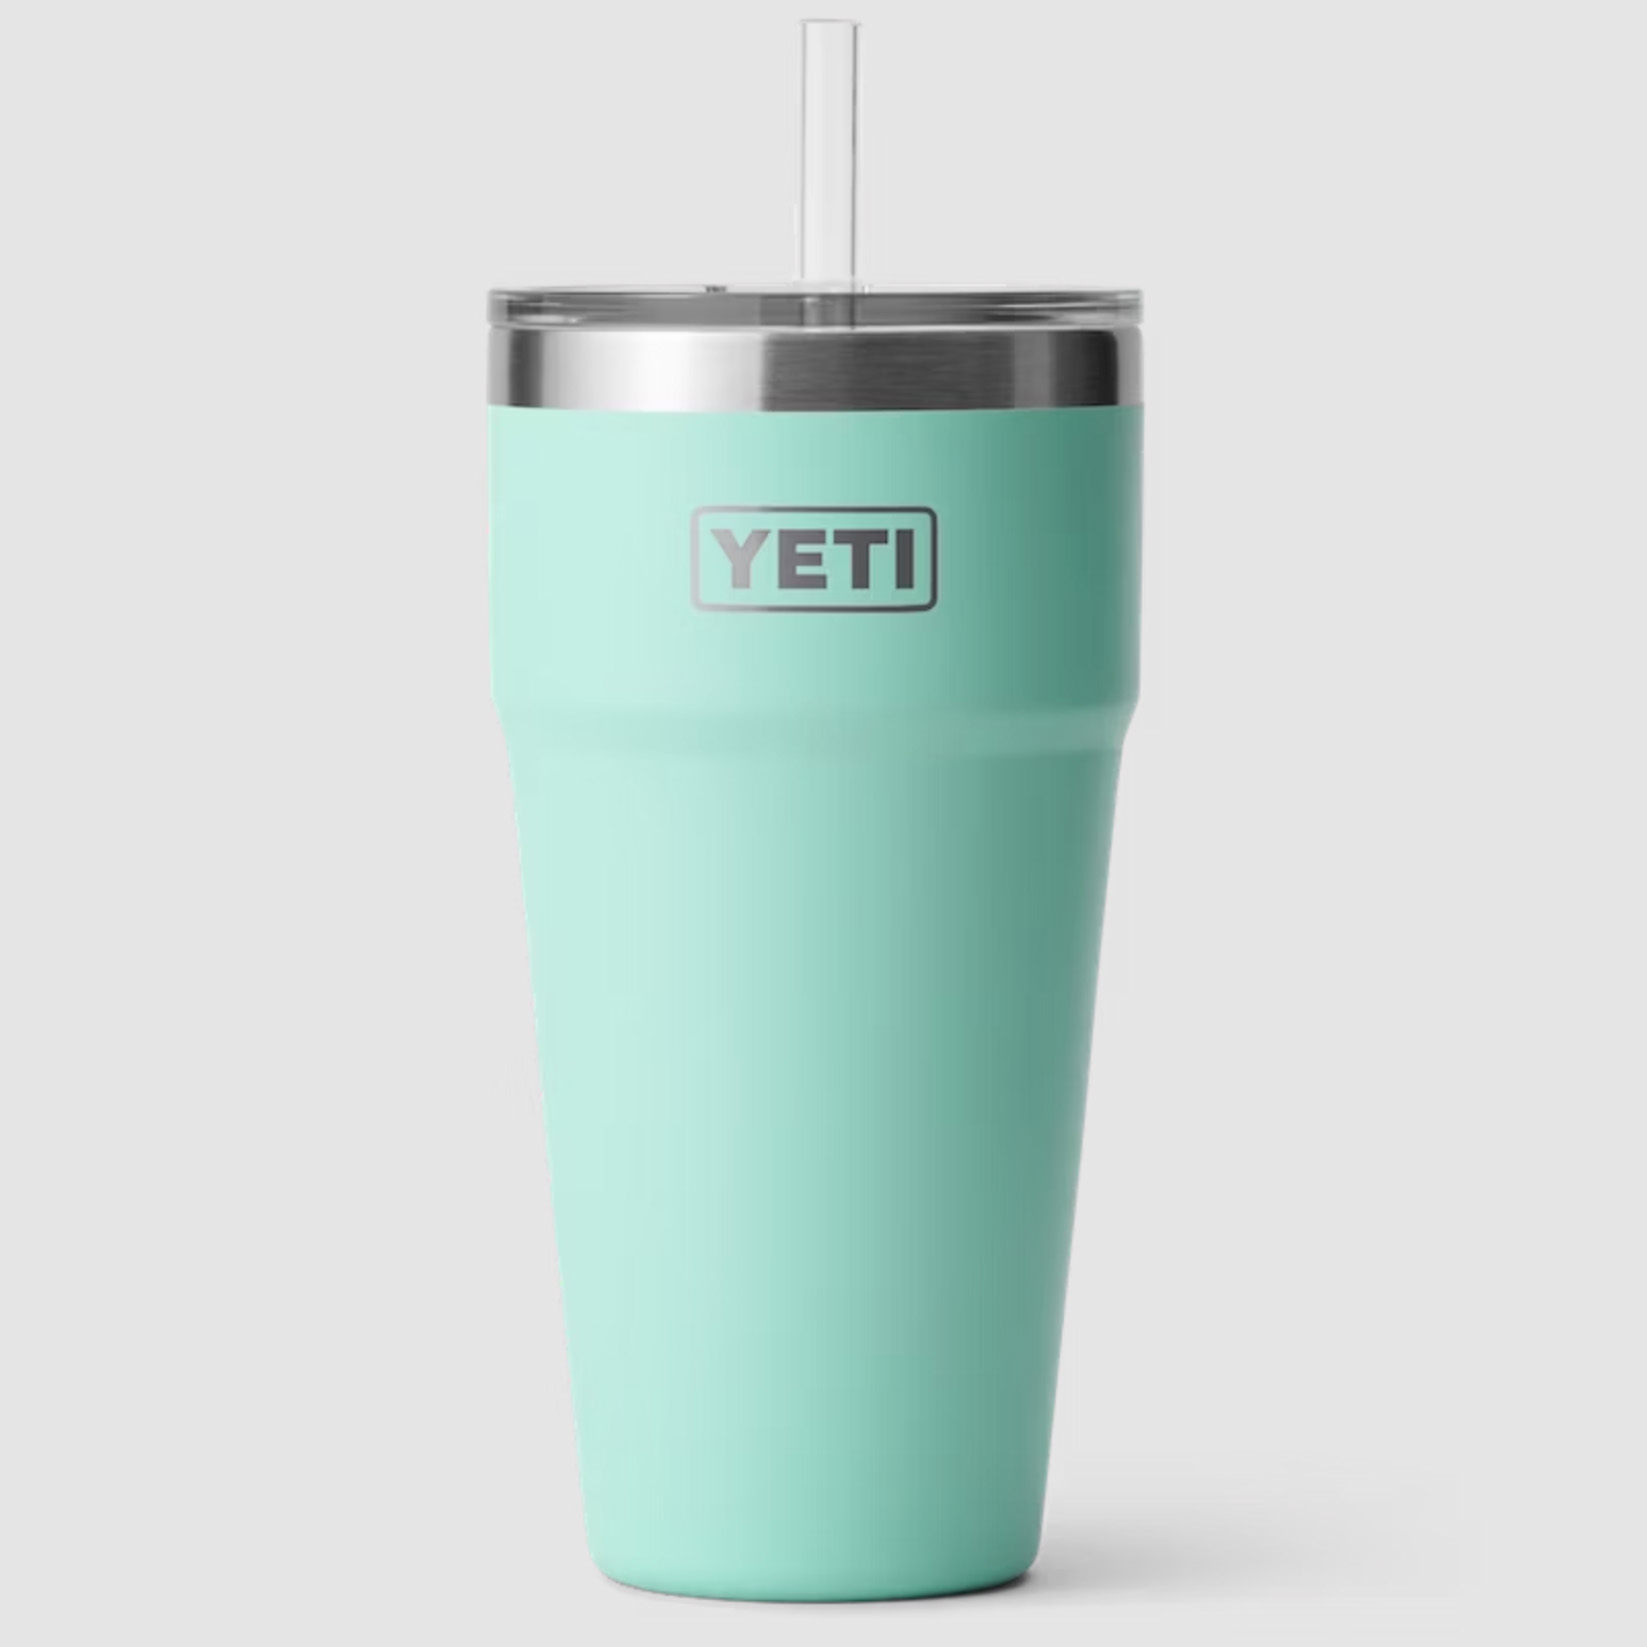 Yeti Rambler Stackable Cup with Straw Lid in blue